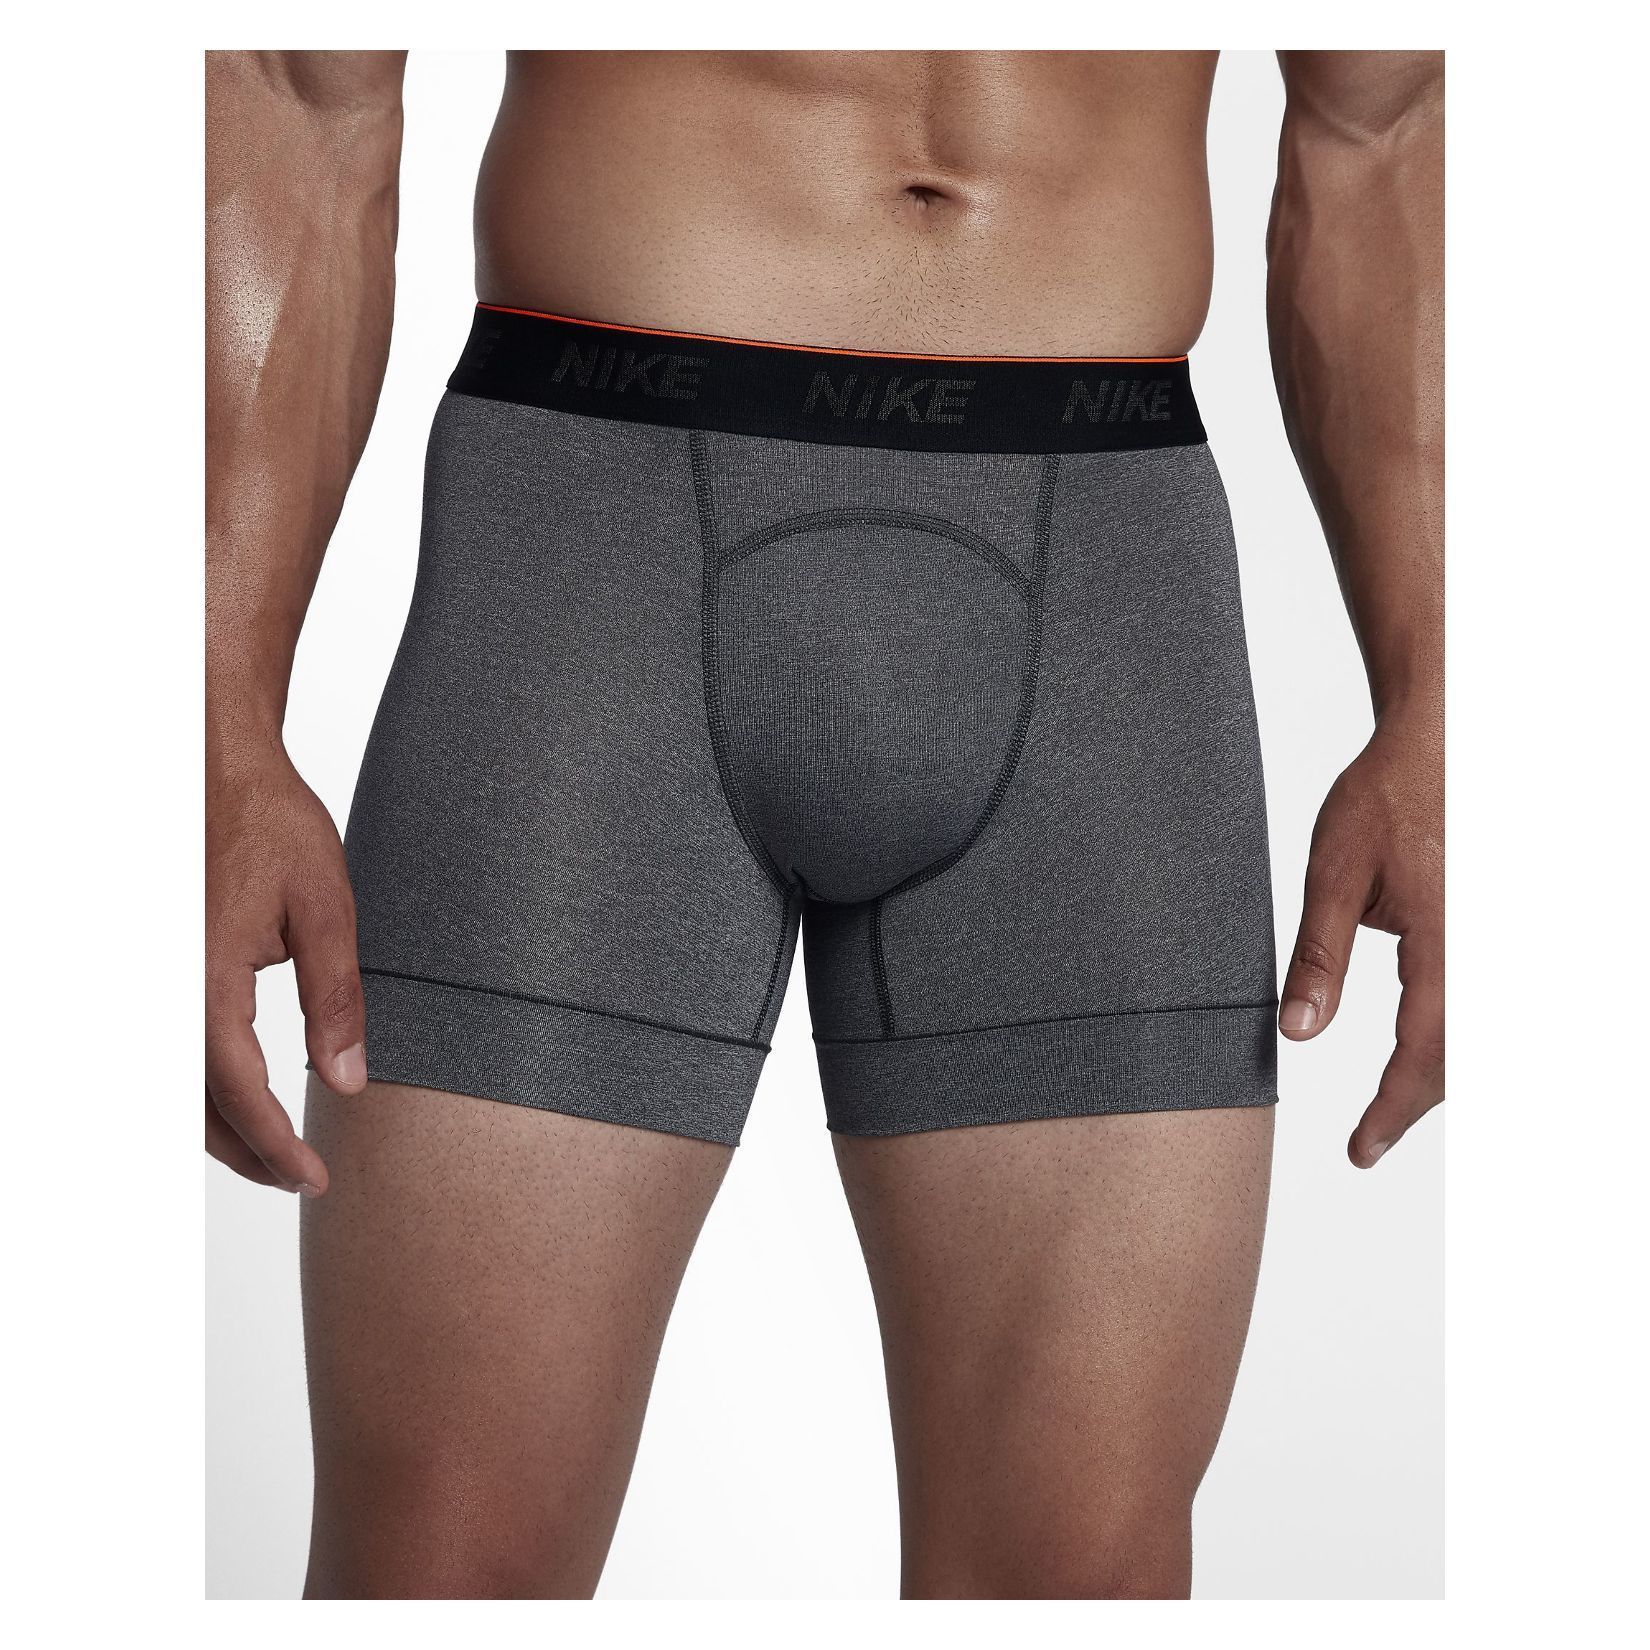 Nike Training Boxer Briefs (2 Pack)